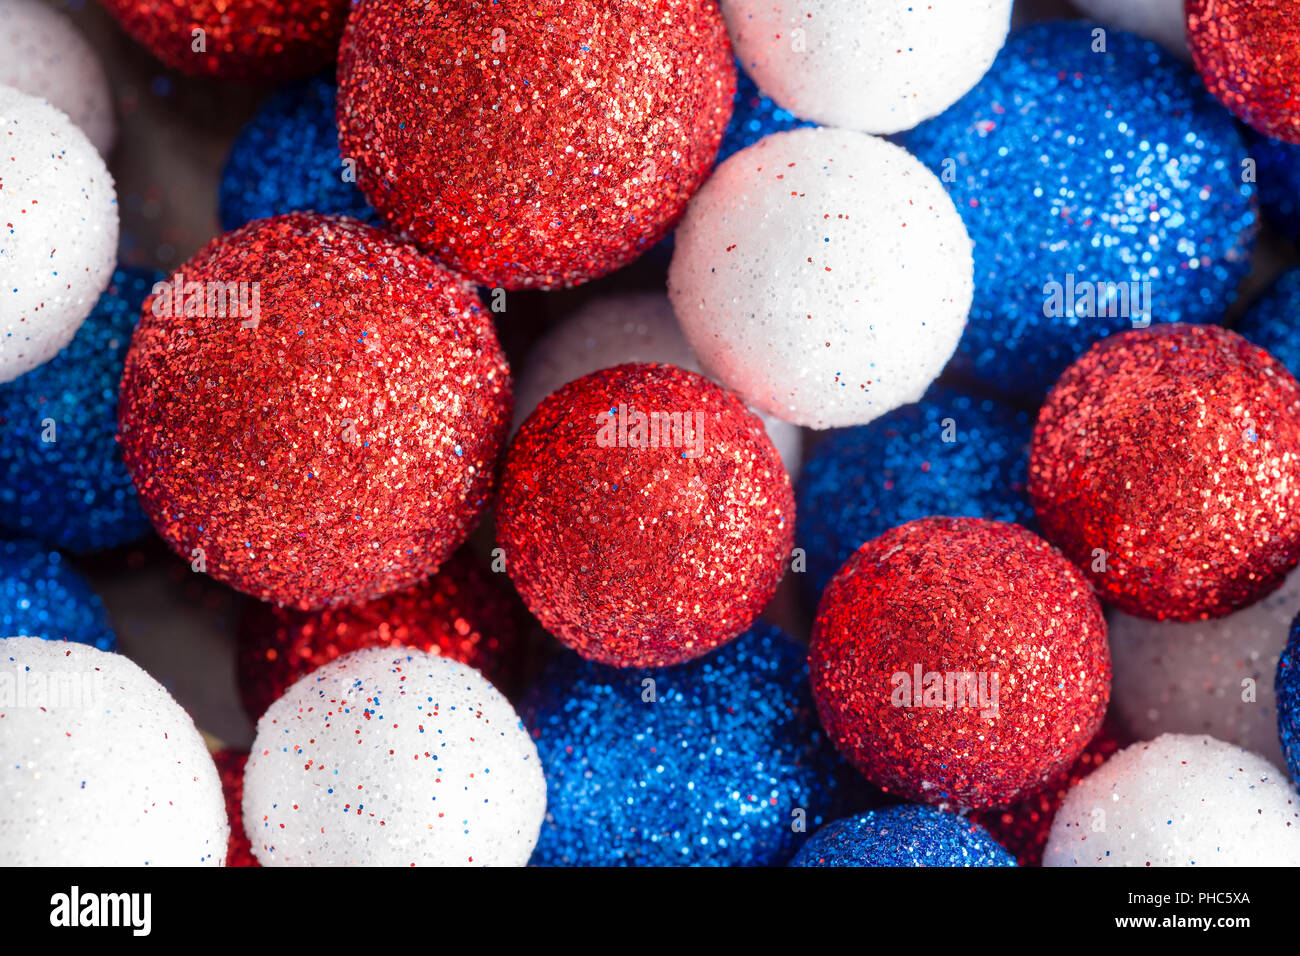 Different sized ornamental red white and blue glitter balls in a random pattern close up full frame view for patriotic American and British themes Stock Photo